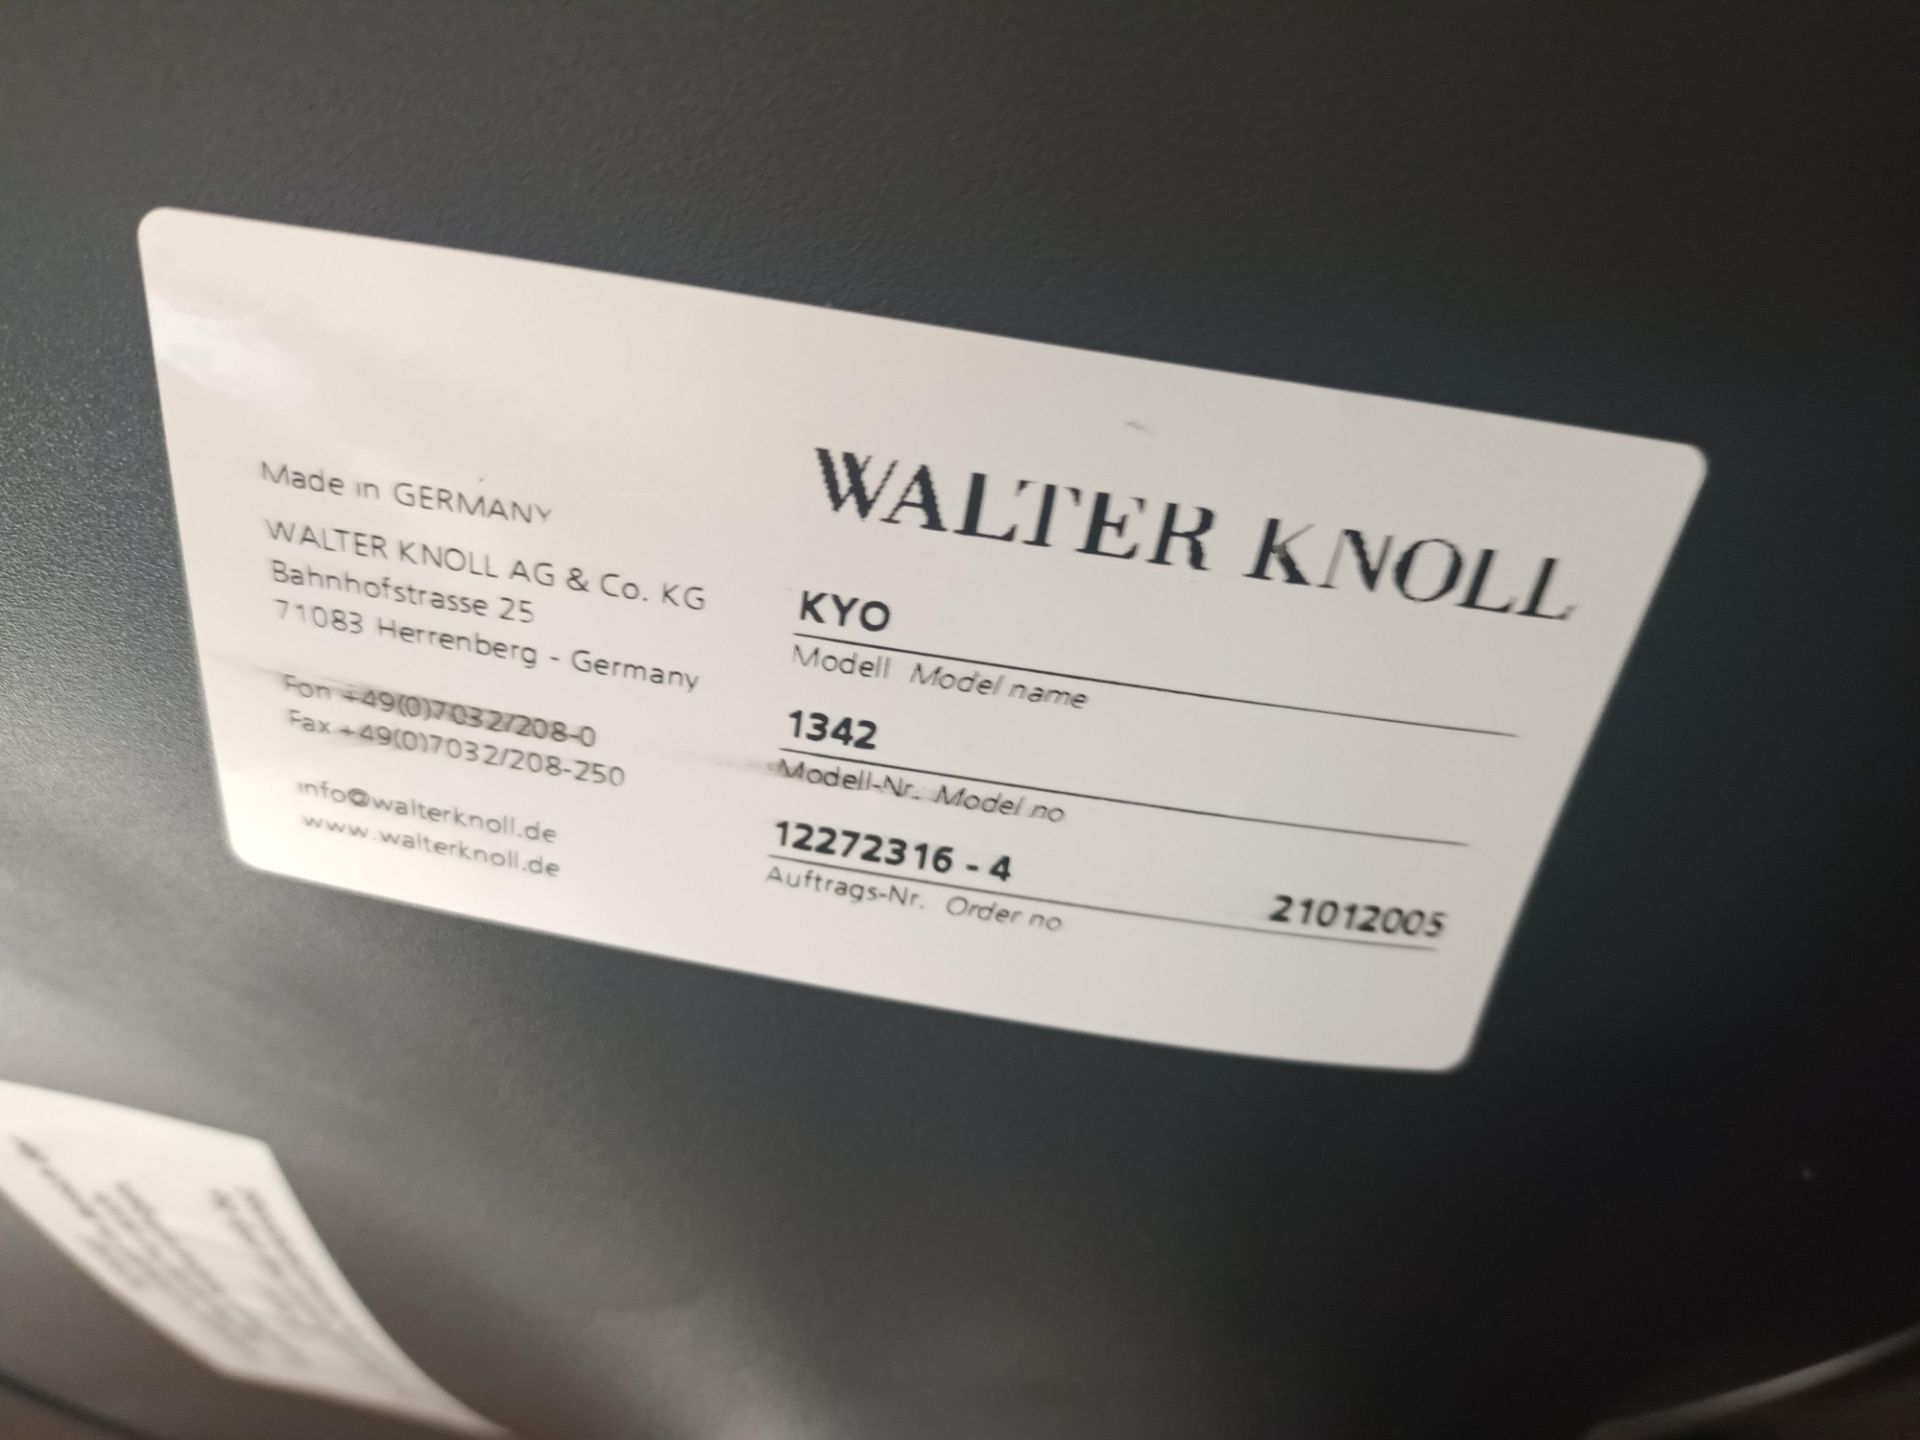 Walter Knoll KYO 1342 brown leather upholstered tub chair (Located: Billericay) - Image 2 of 3